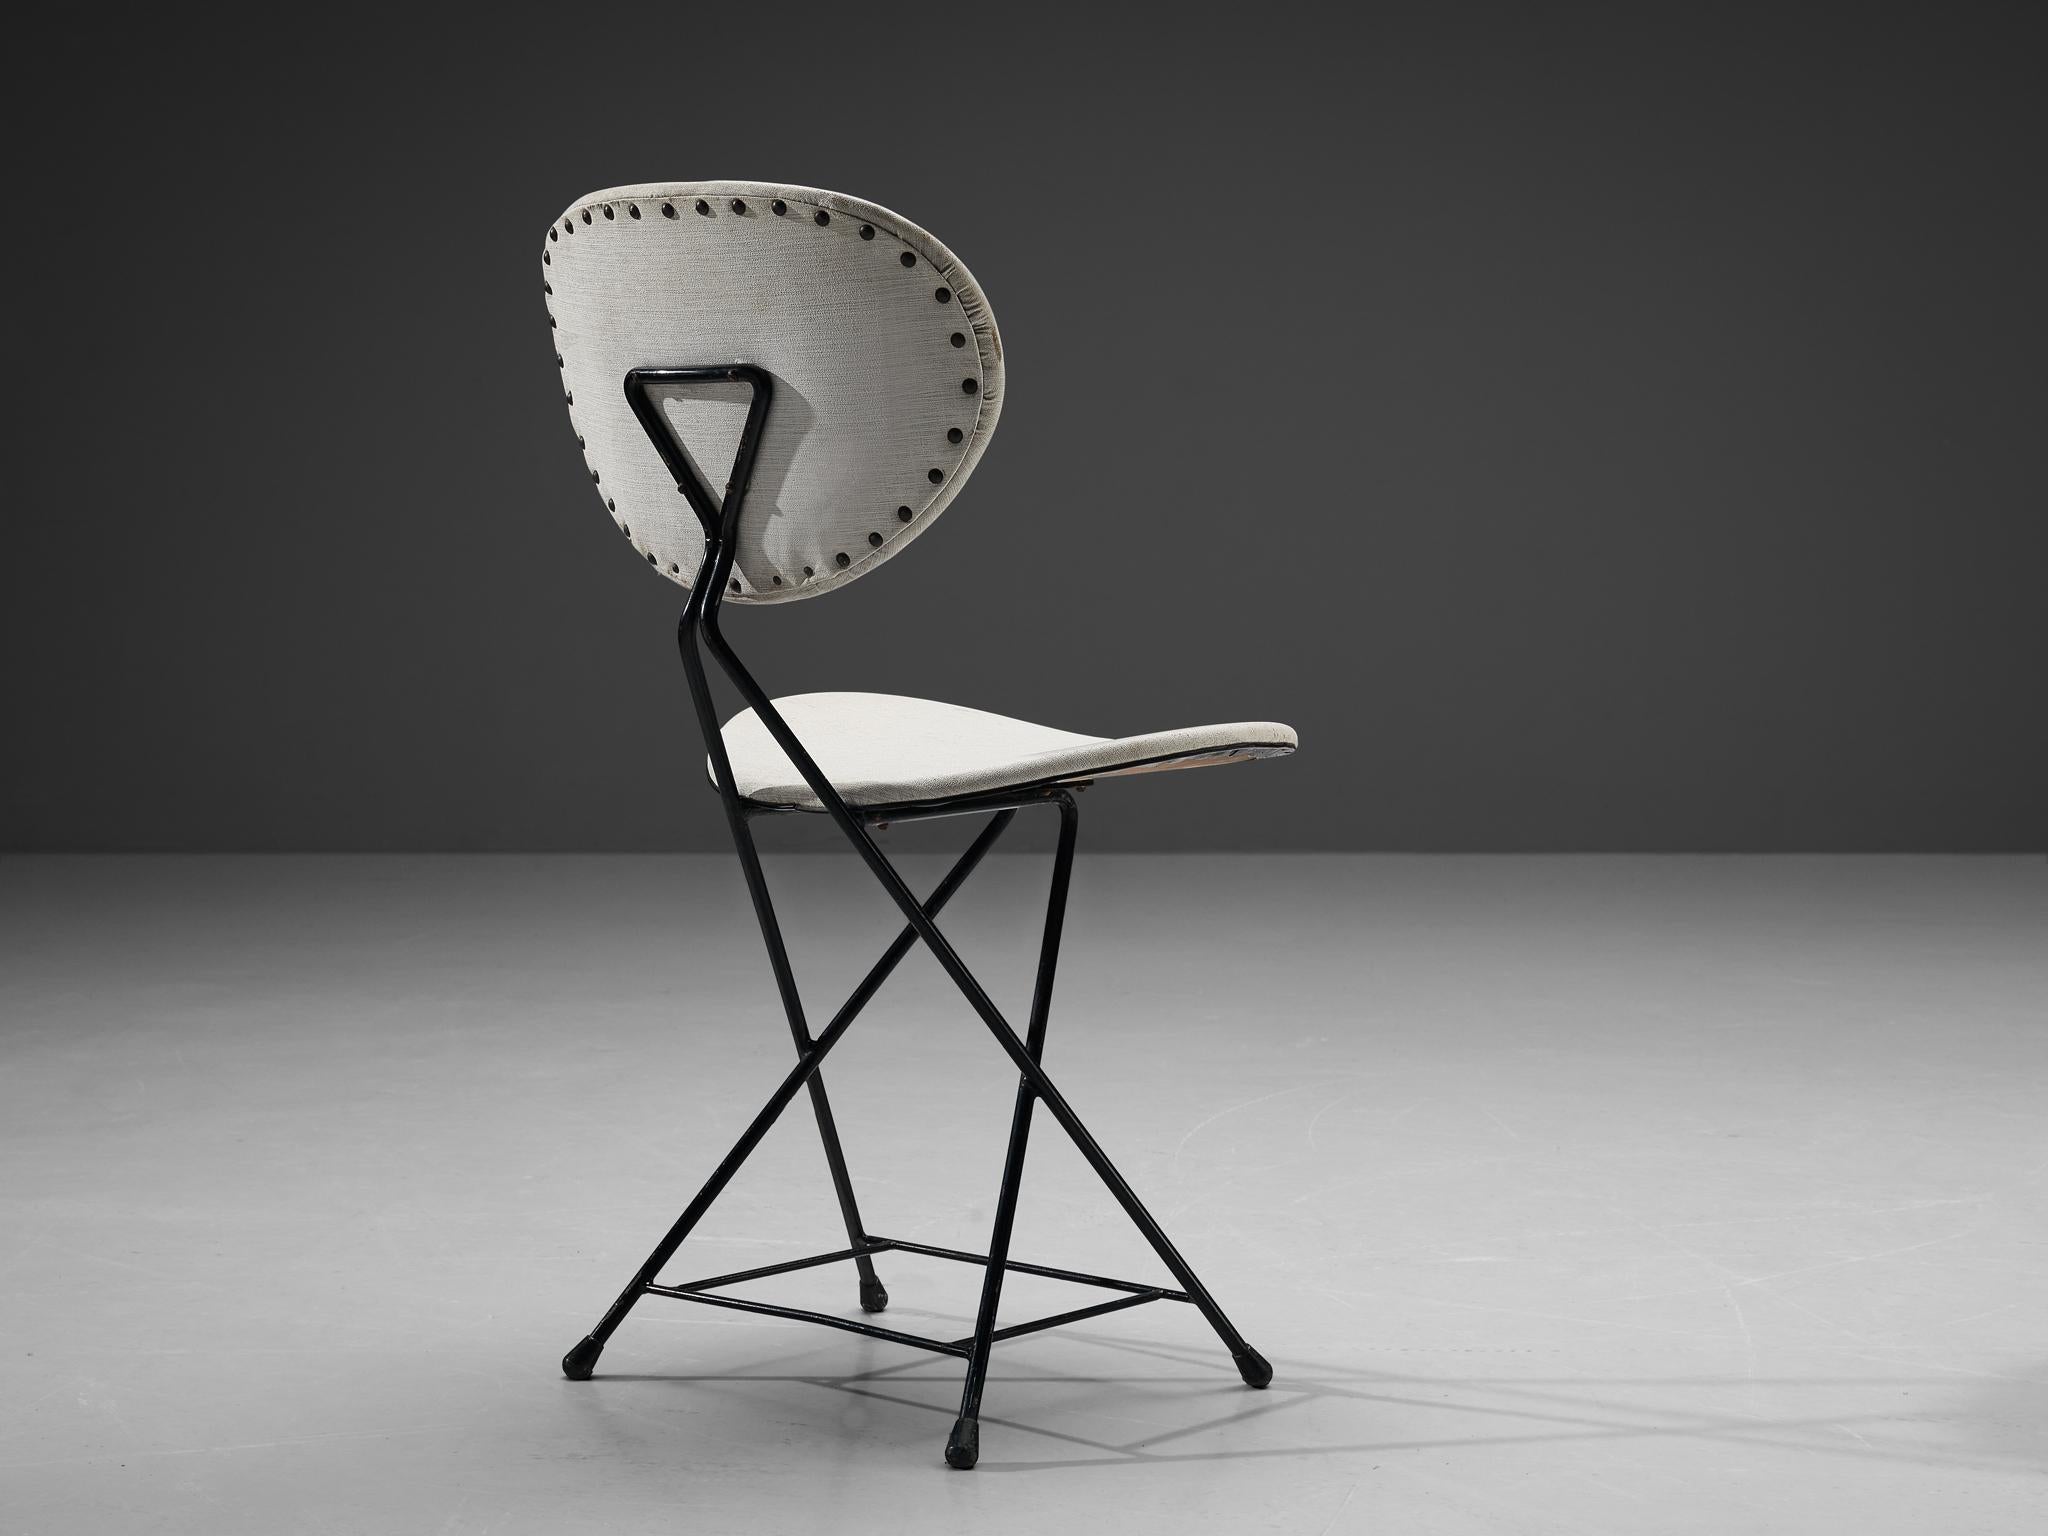 Rob Parry, dining chair, fabric, metal, lacquered metal, The Netherlands, designed in 1953

This chair is designed by Rob Parry and truly embodies the Dutch Minimalist Mid-Century design. The black lacquered metal frame is beautifully shaped